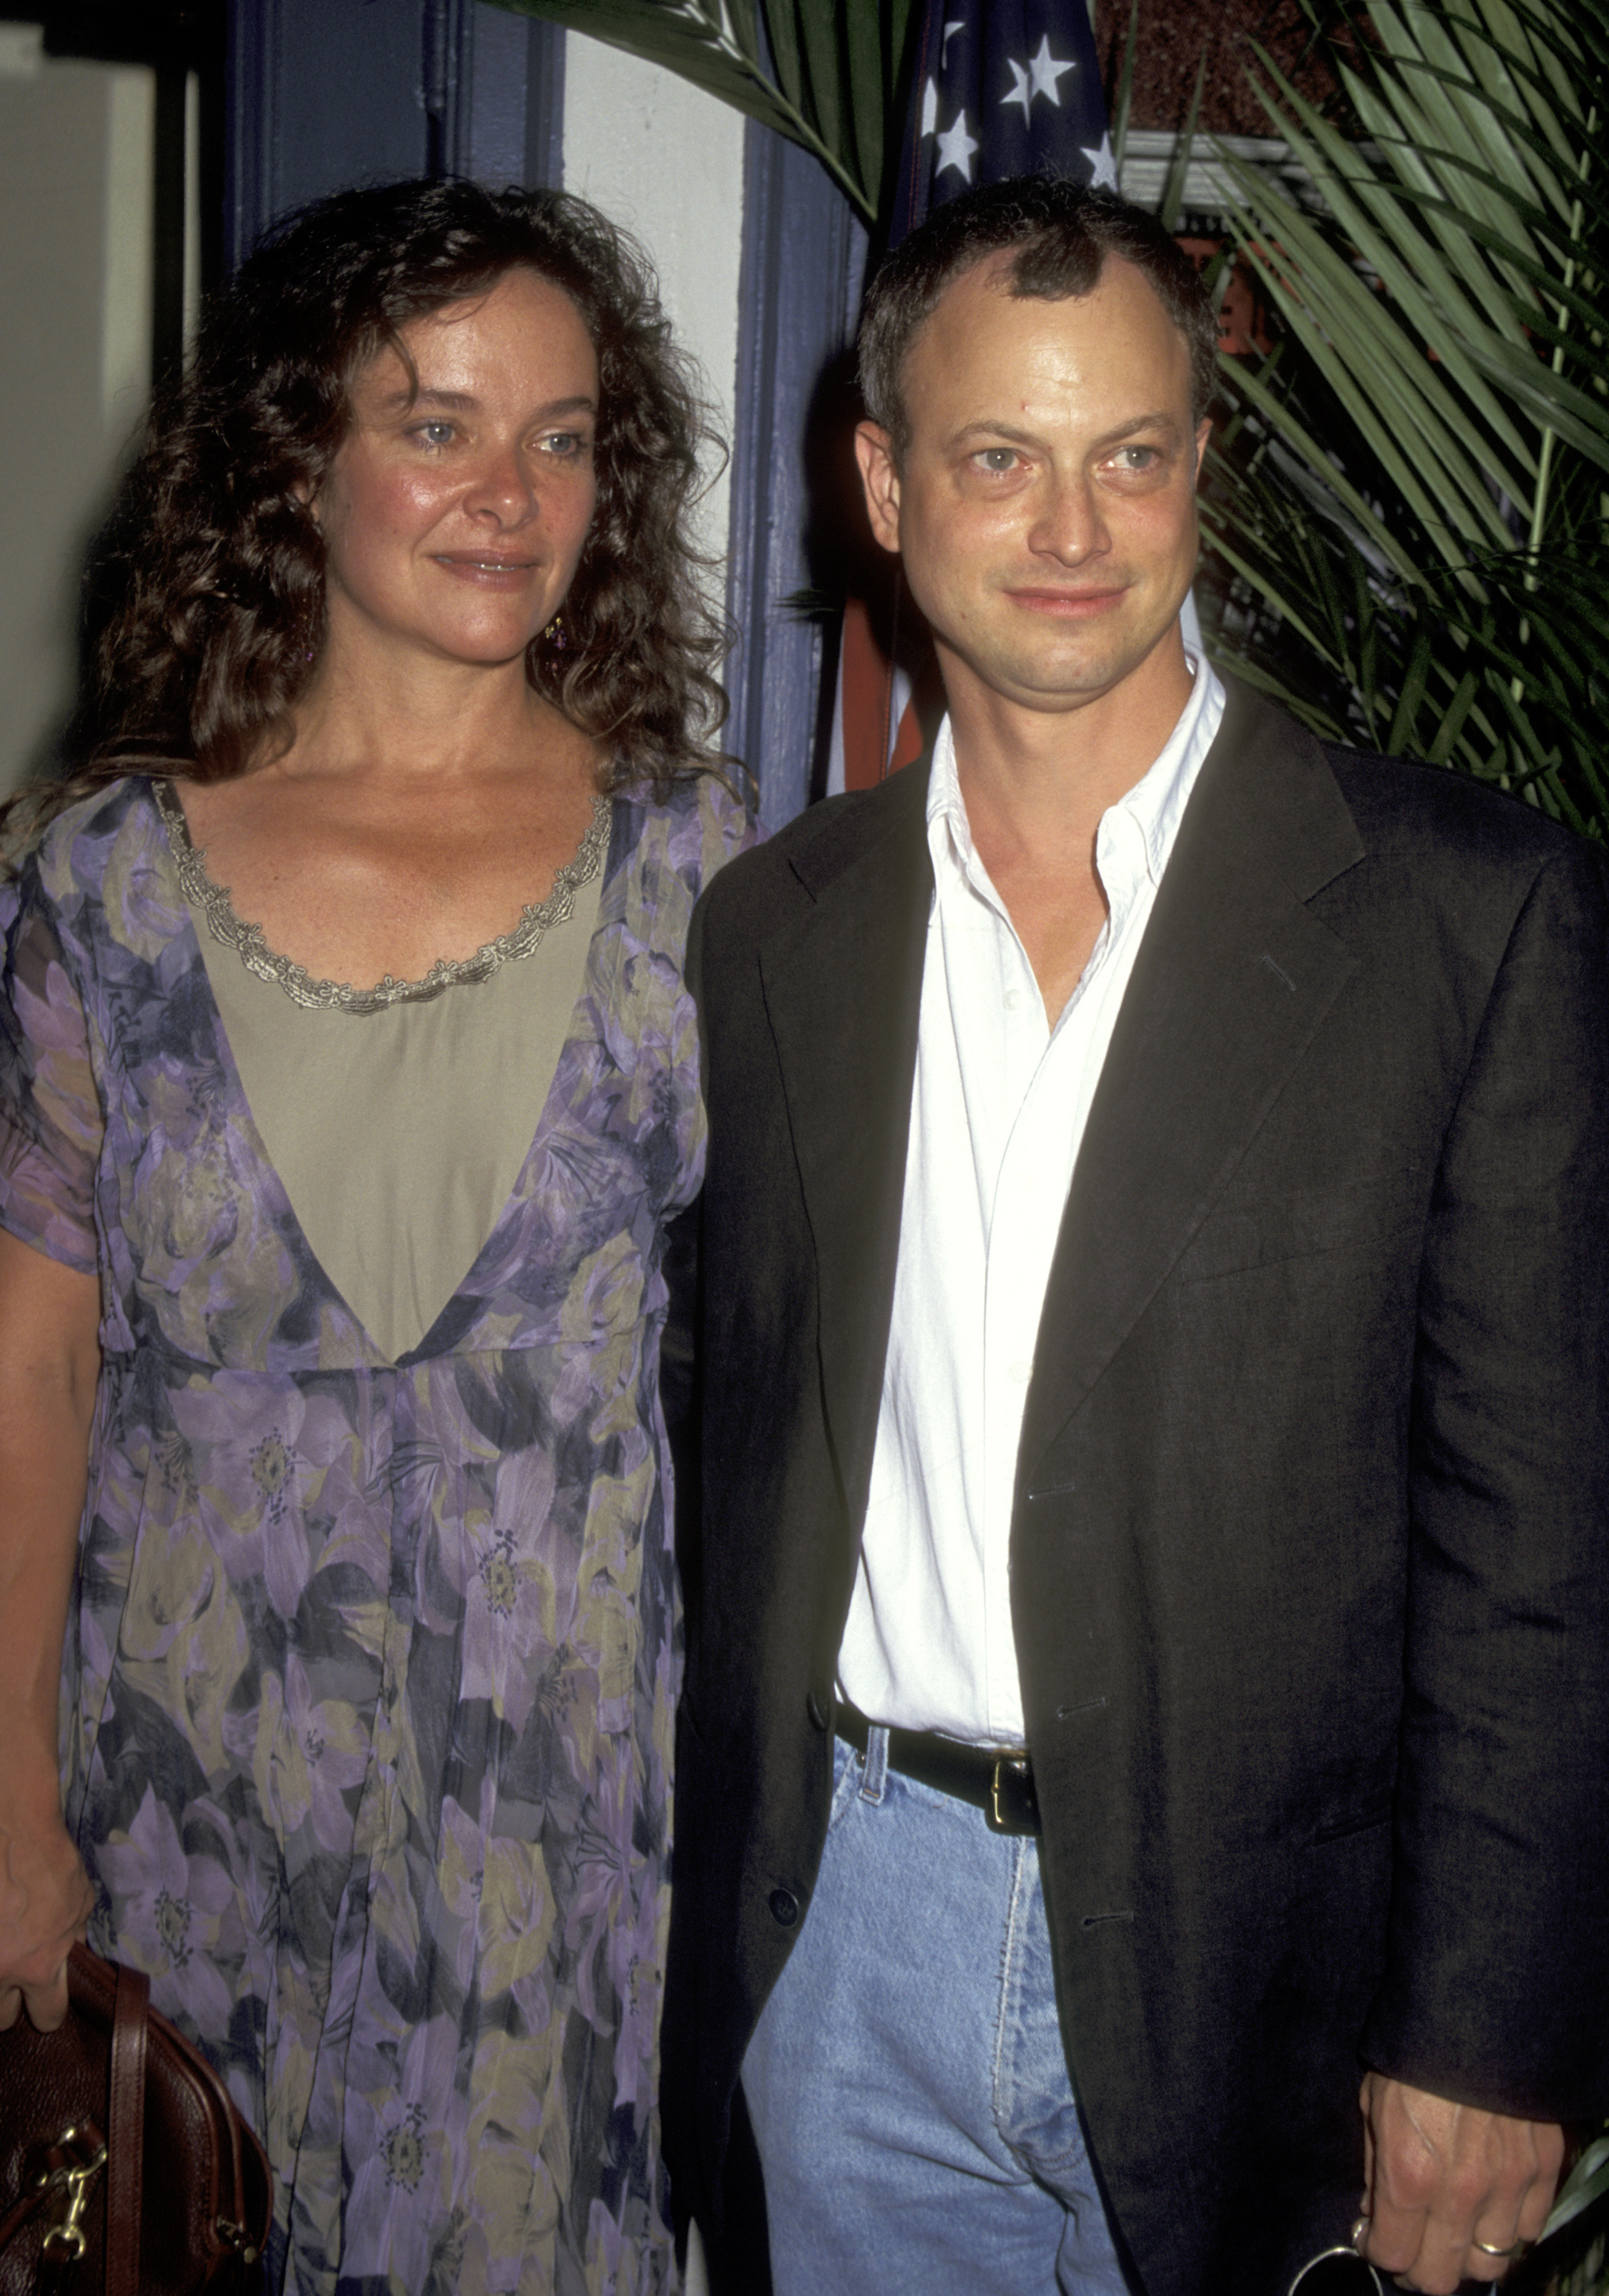 Moira Harris and Gary Sinise at the screening of "Truman" at Sag Harbor Cinema on August 12, 1995 in Sag Harbor, New York | Source: Getty Images